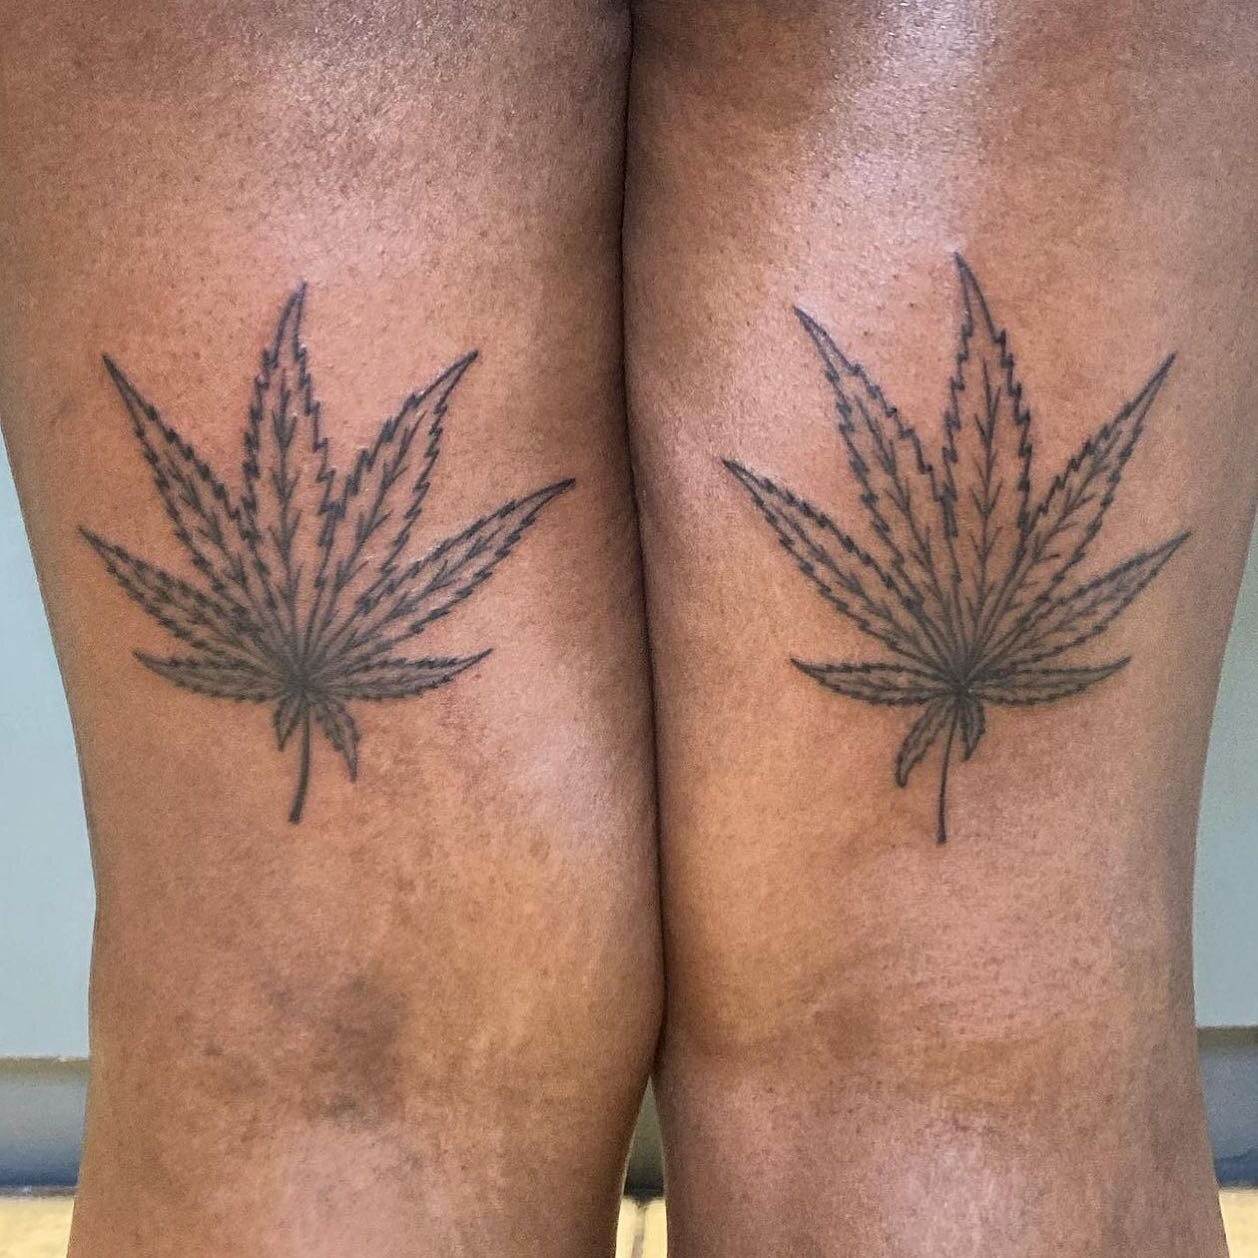 Cute matching weed leaves tattoo by @_k.ink.y_ 
.

Dark Atelier Tattoo
🏰1115 Front St. in Old Sac
☎️(916)573-3225
Walk ins welcomed ✔️
.
.
.
.
.
.
.
.
.
.
.
#california #sacramento #sacramentotattooshop #sacramentotattoos #tattooart #sactown #sacram